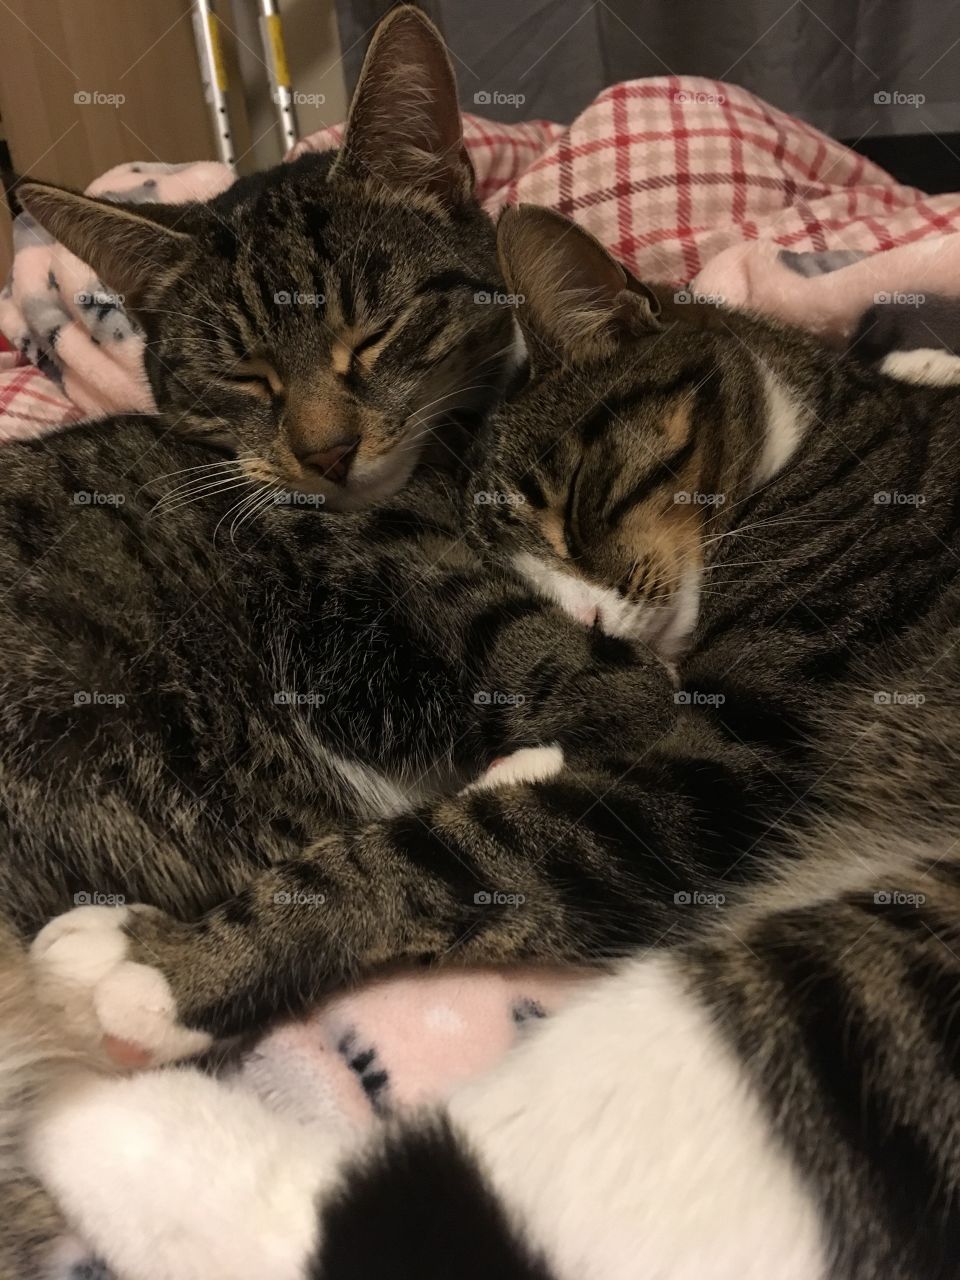 Cuddly kitty cats ❤️